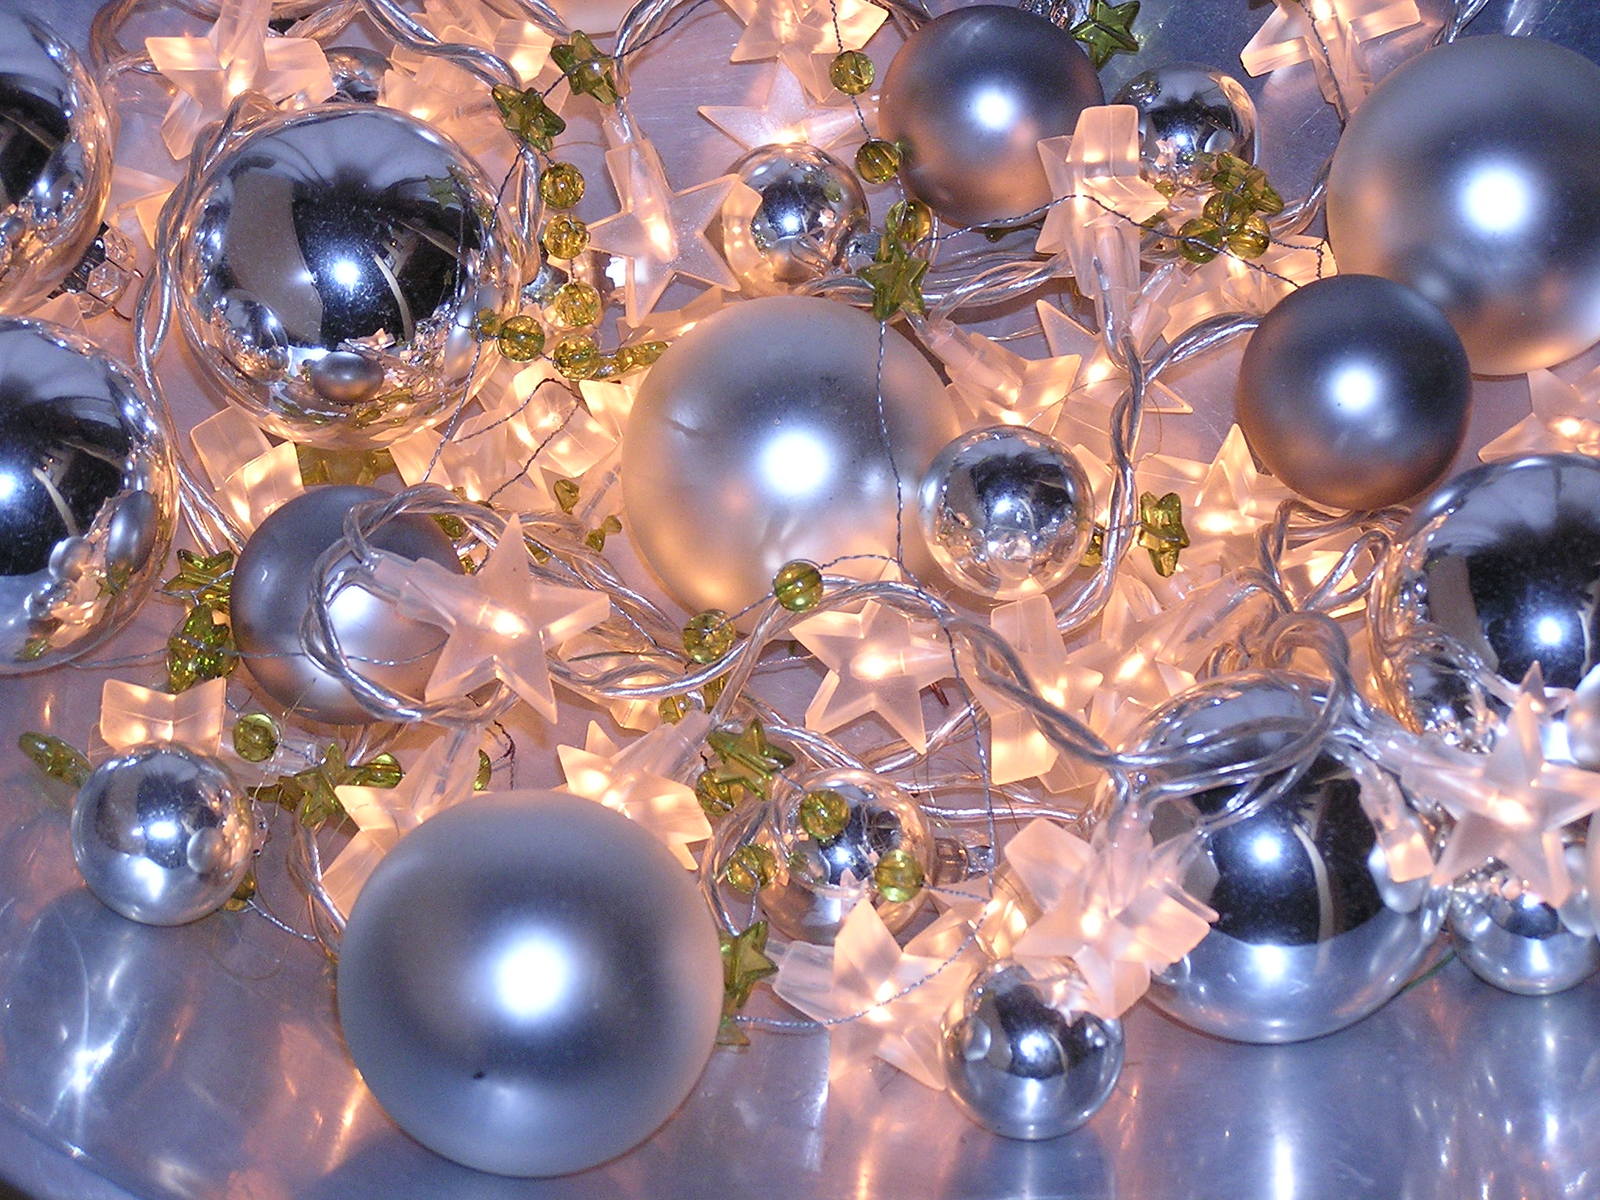 a metal plate topped with lots of ornaments